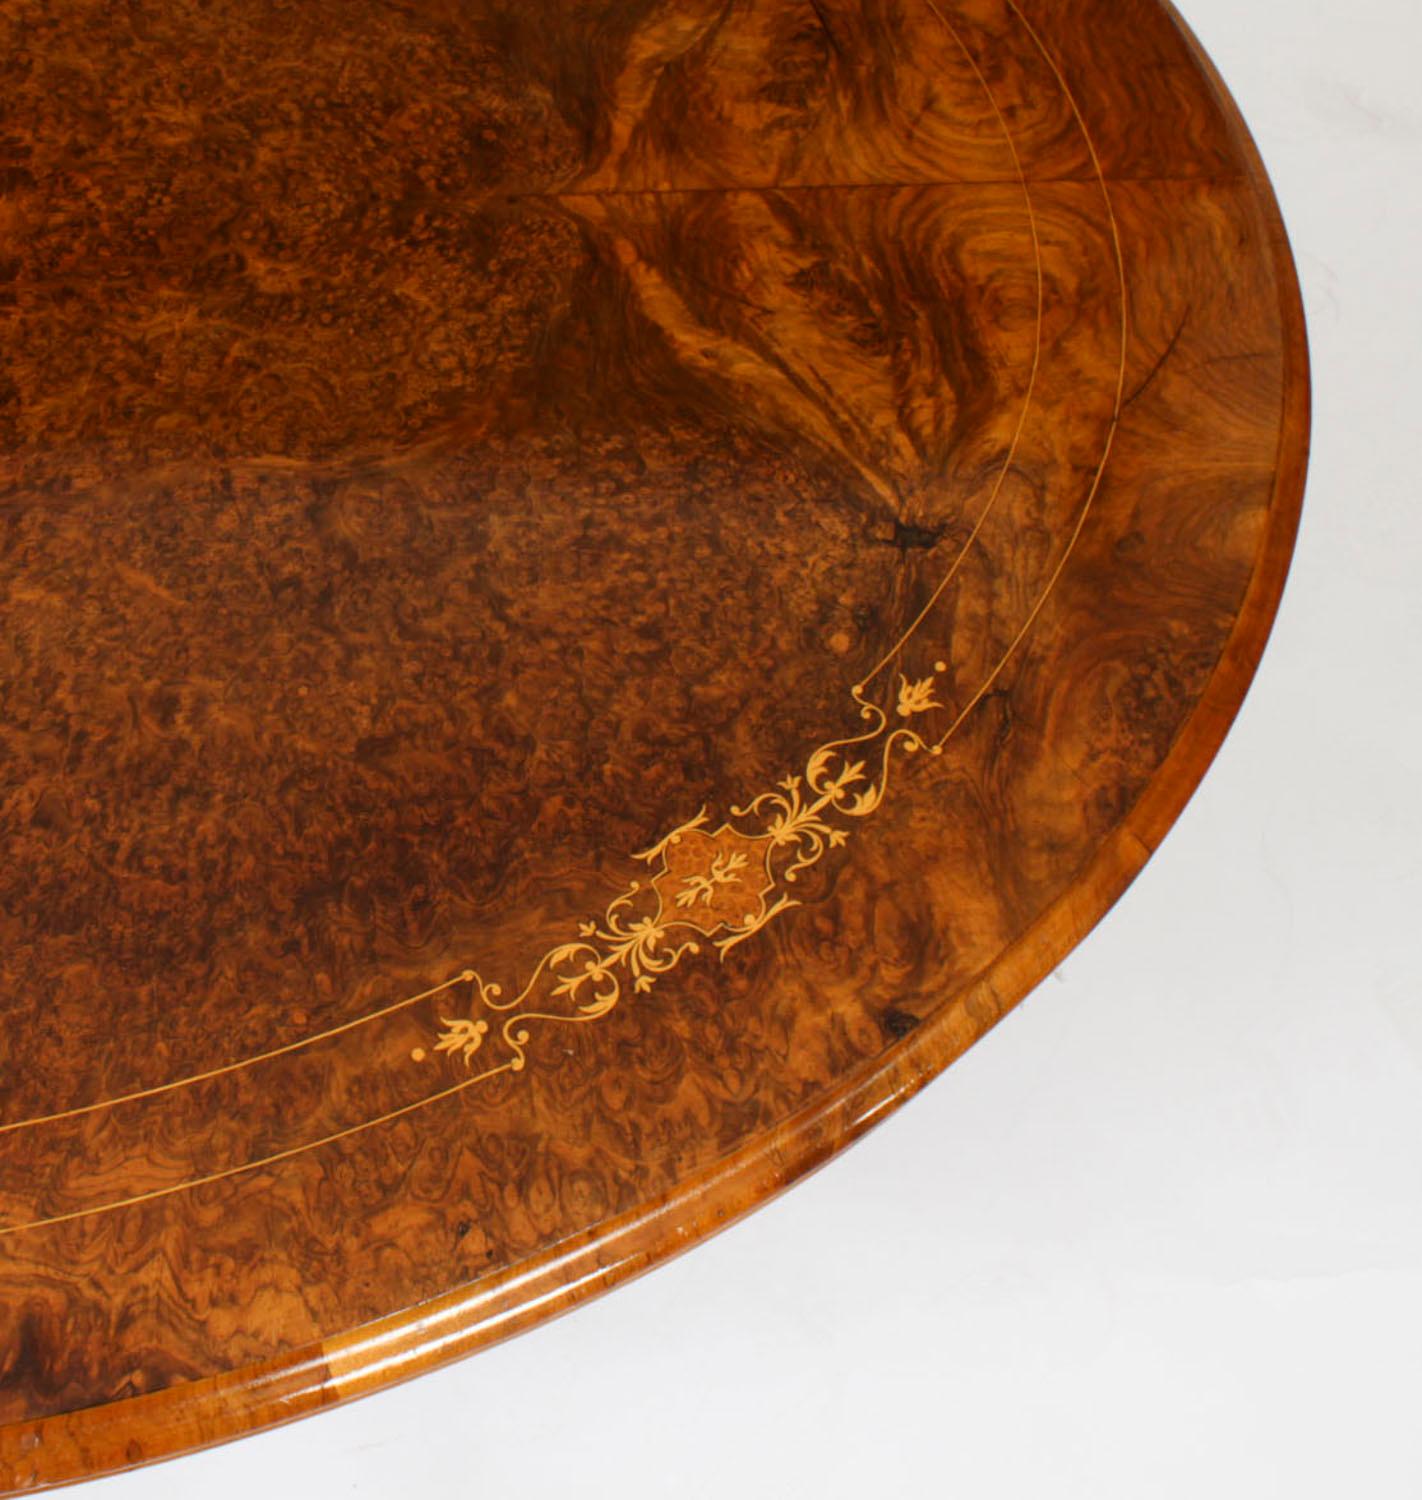 Antique Burr Walnut & Marquetry Oval Coffee Table Circa 19th Century For Sale 2